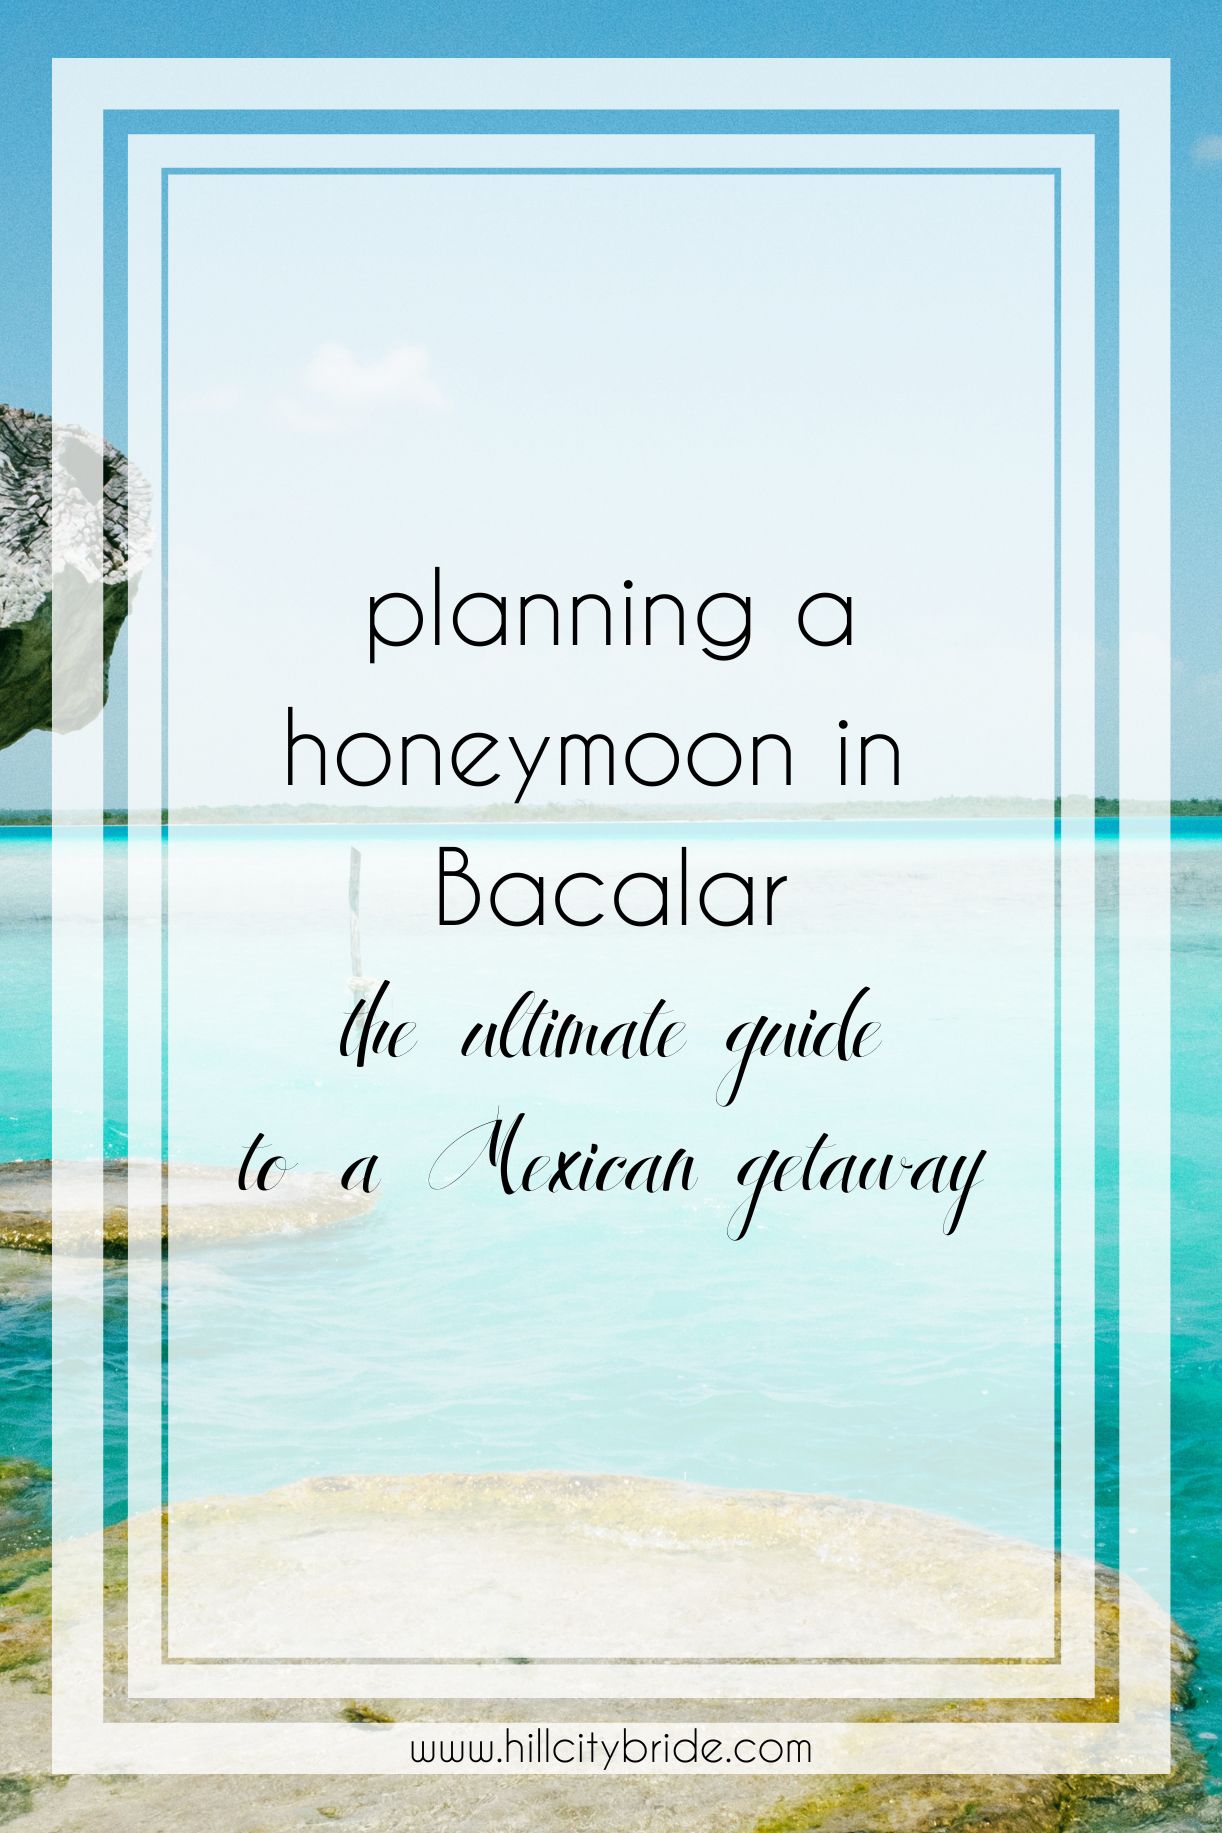 The Best Guide to Having a Bacalar Honeymoon